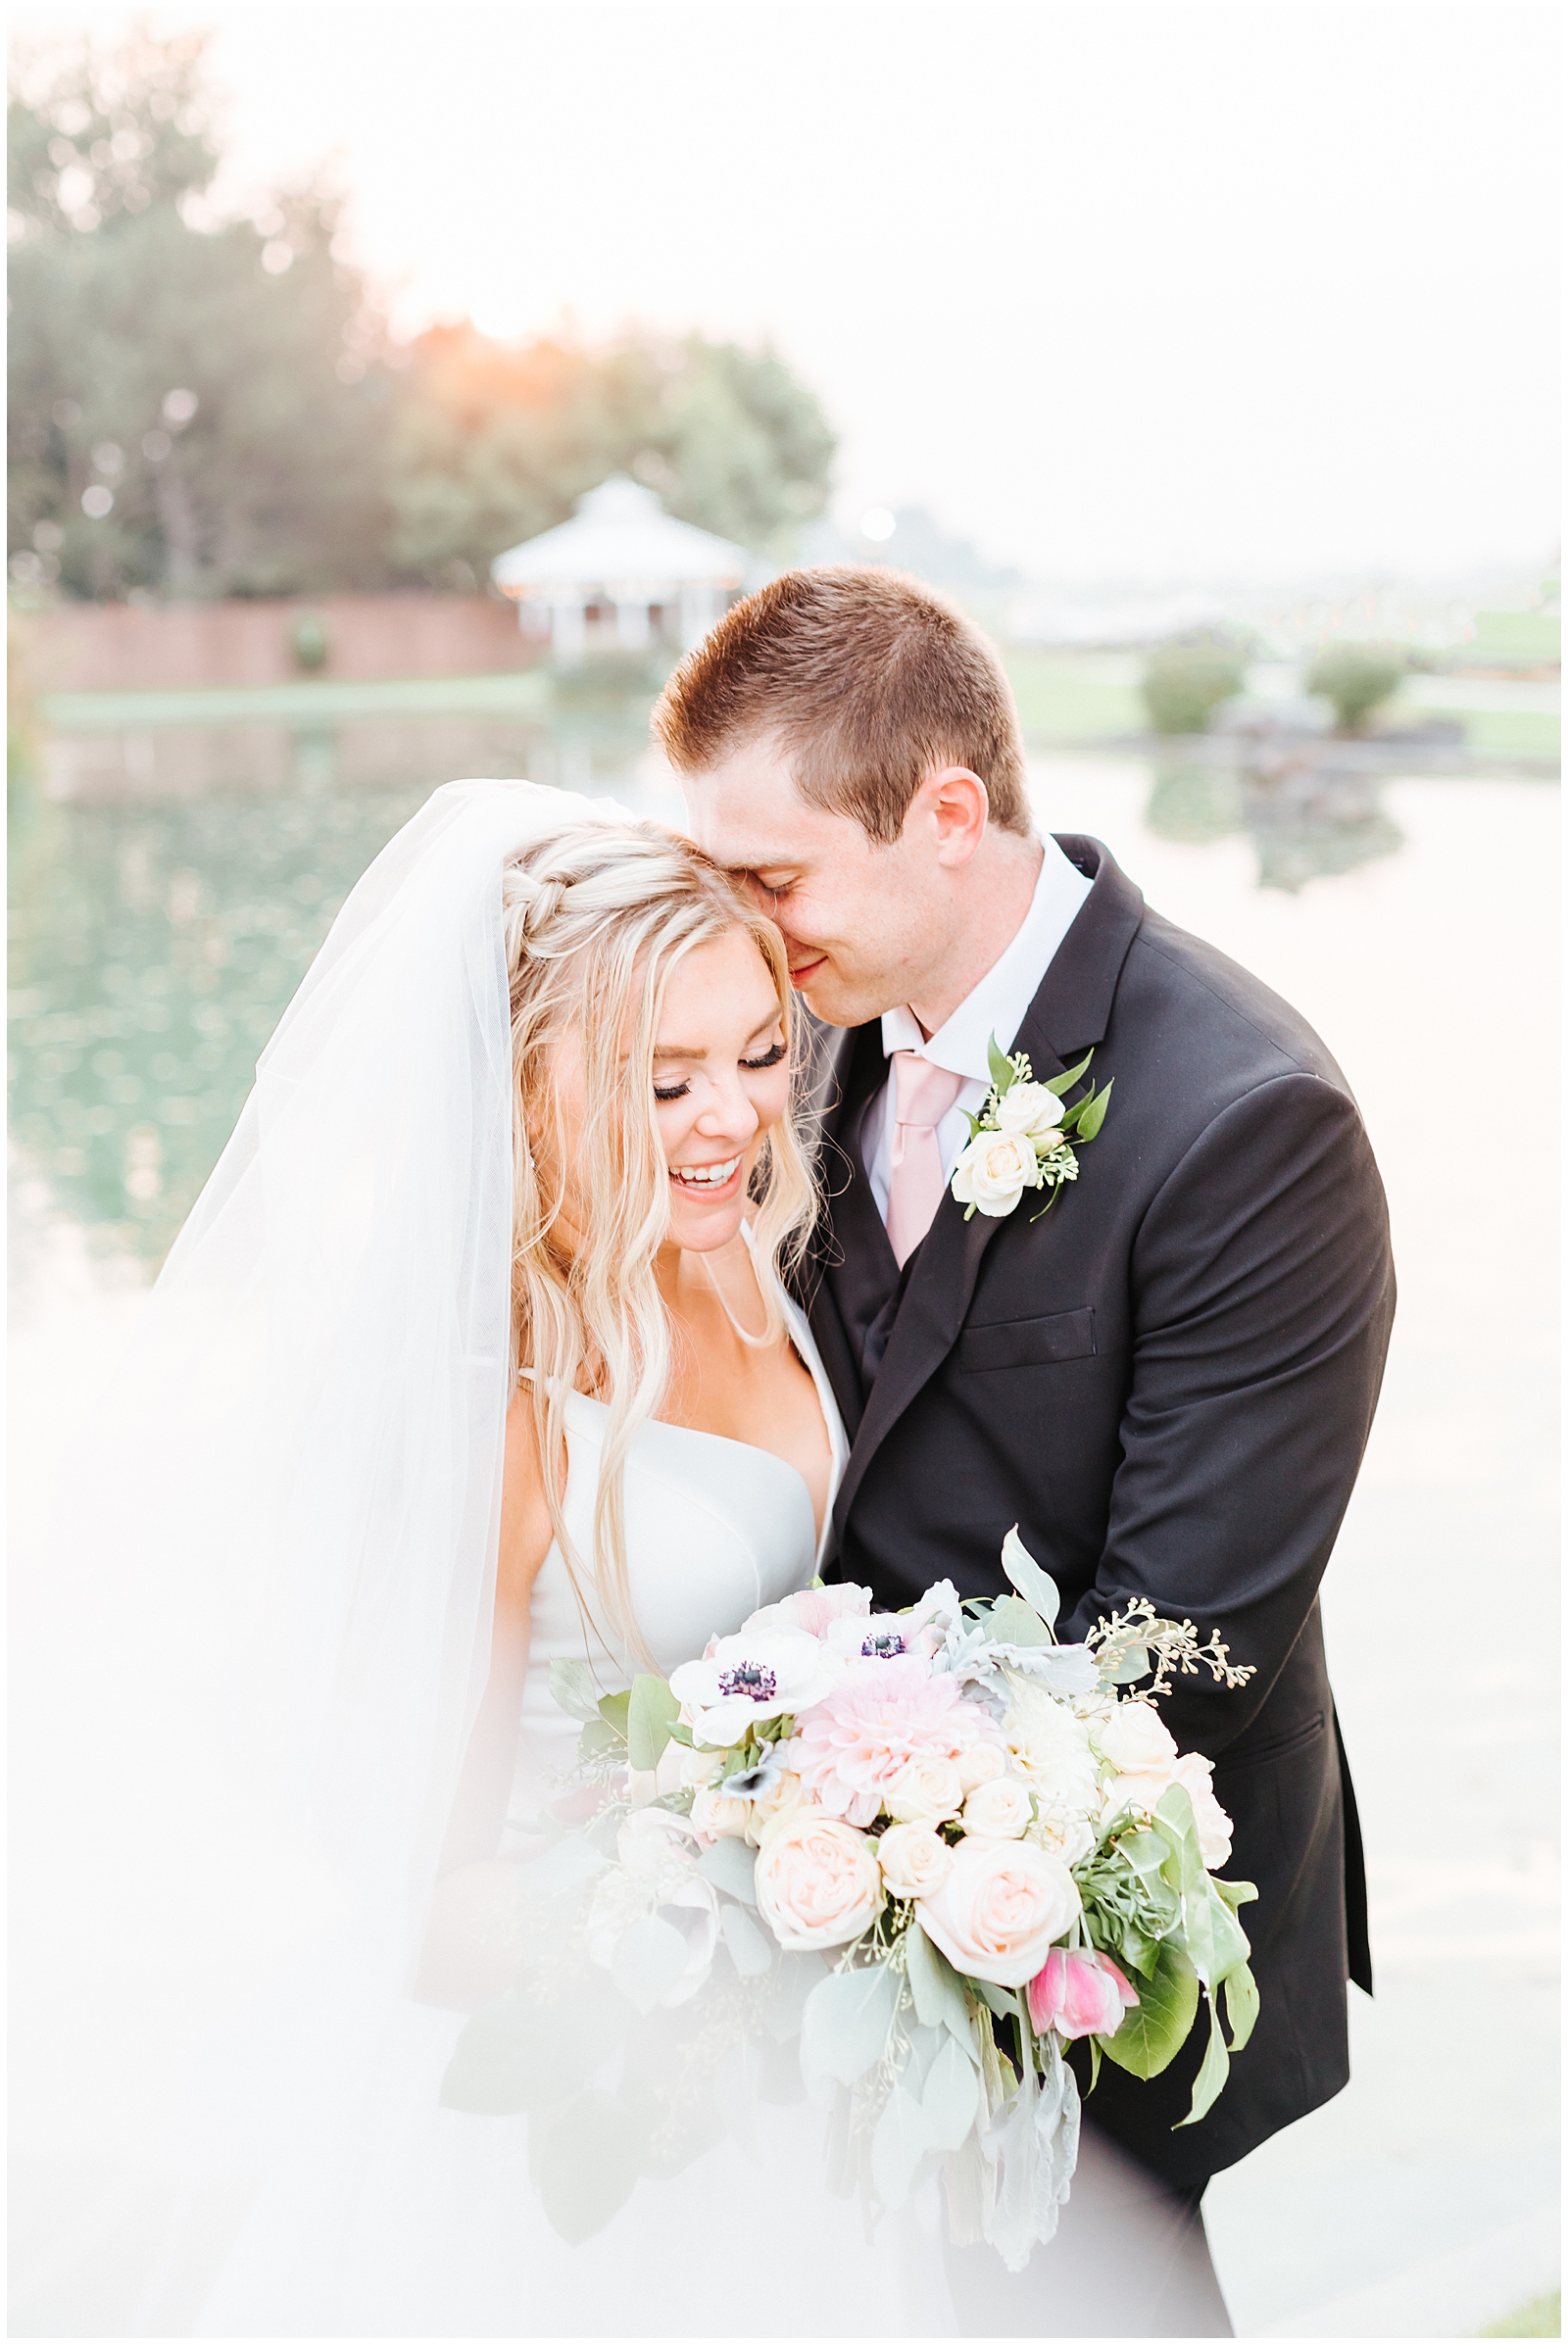 Husband and Wife Golden hour Portraits at August Still Water Hollow Wedding Swooping Veil